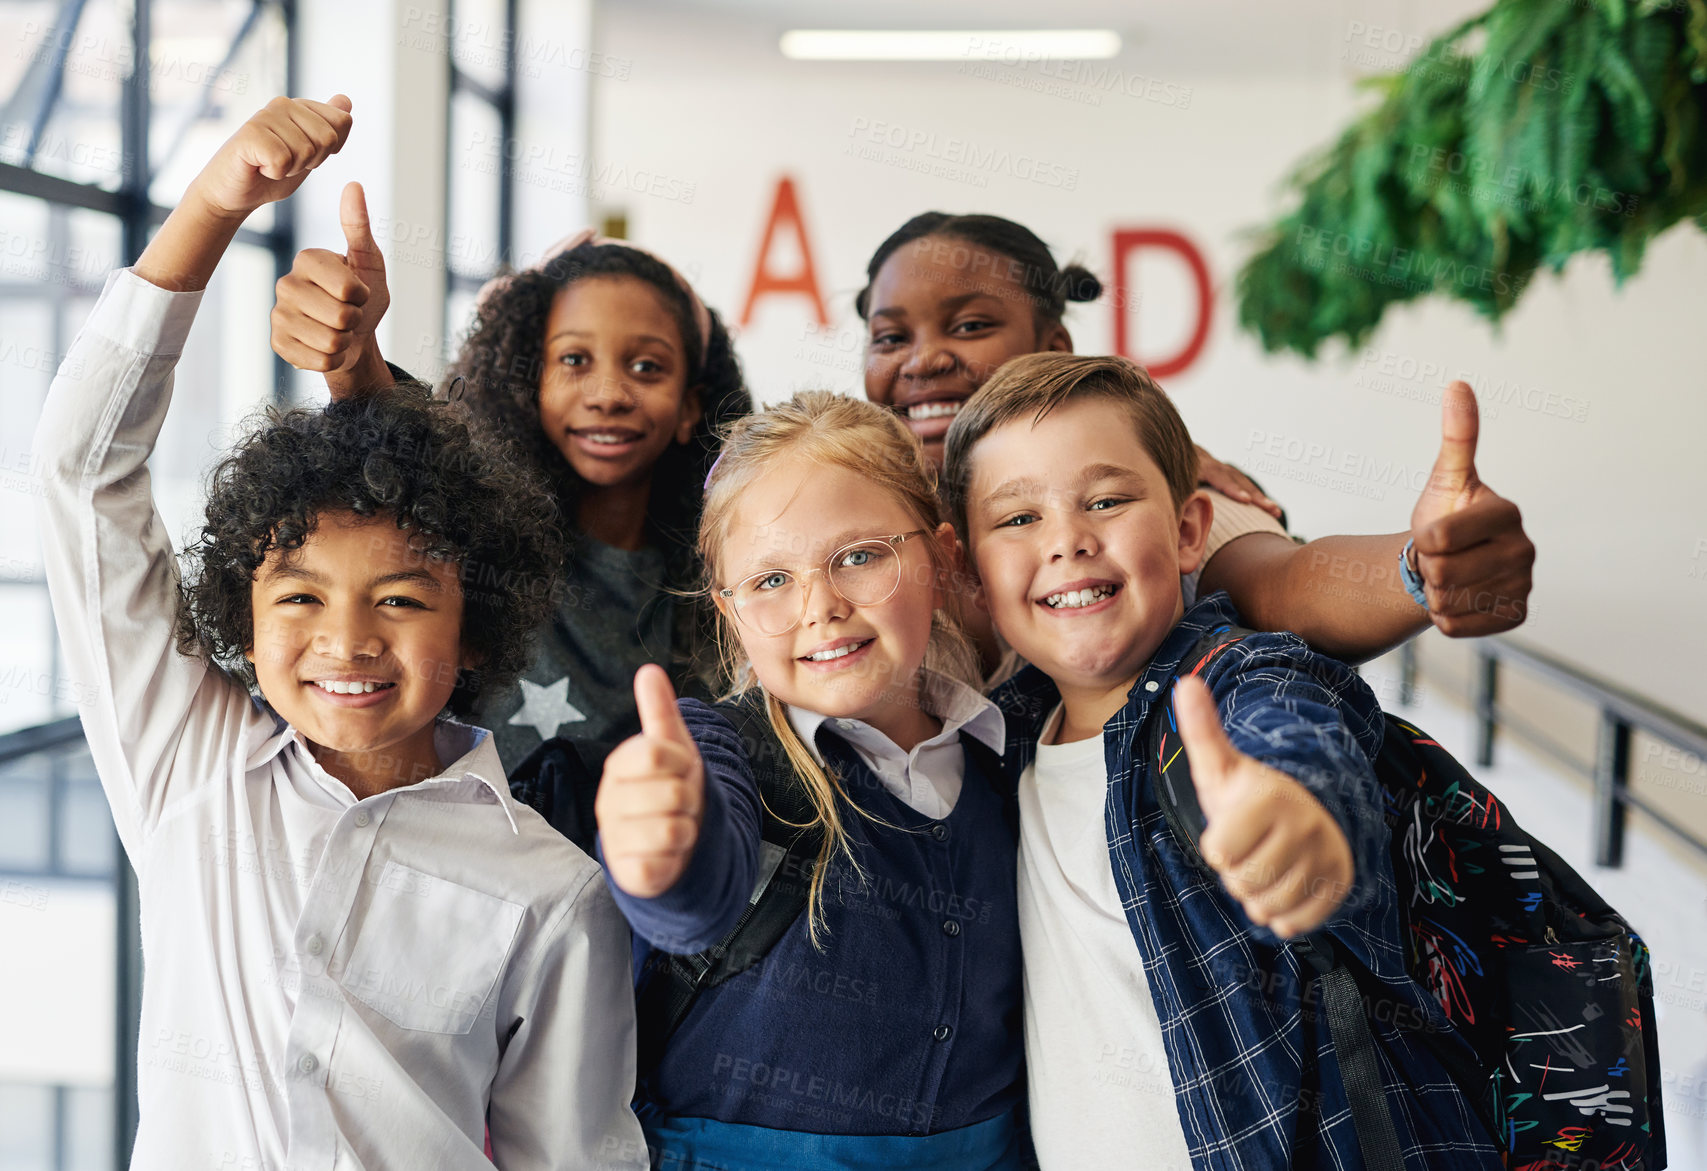 Buy stock photo Shot of a diverse group of children standing together in the hallway at school and giving a thumbs up gesture